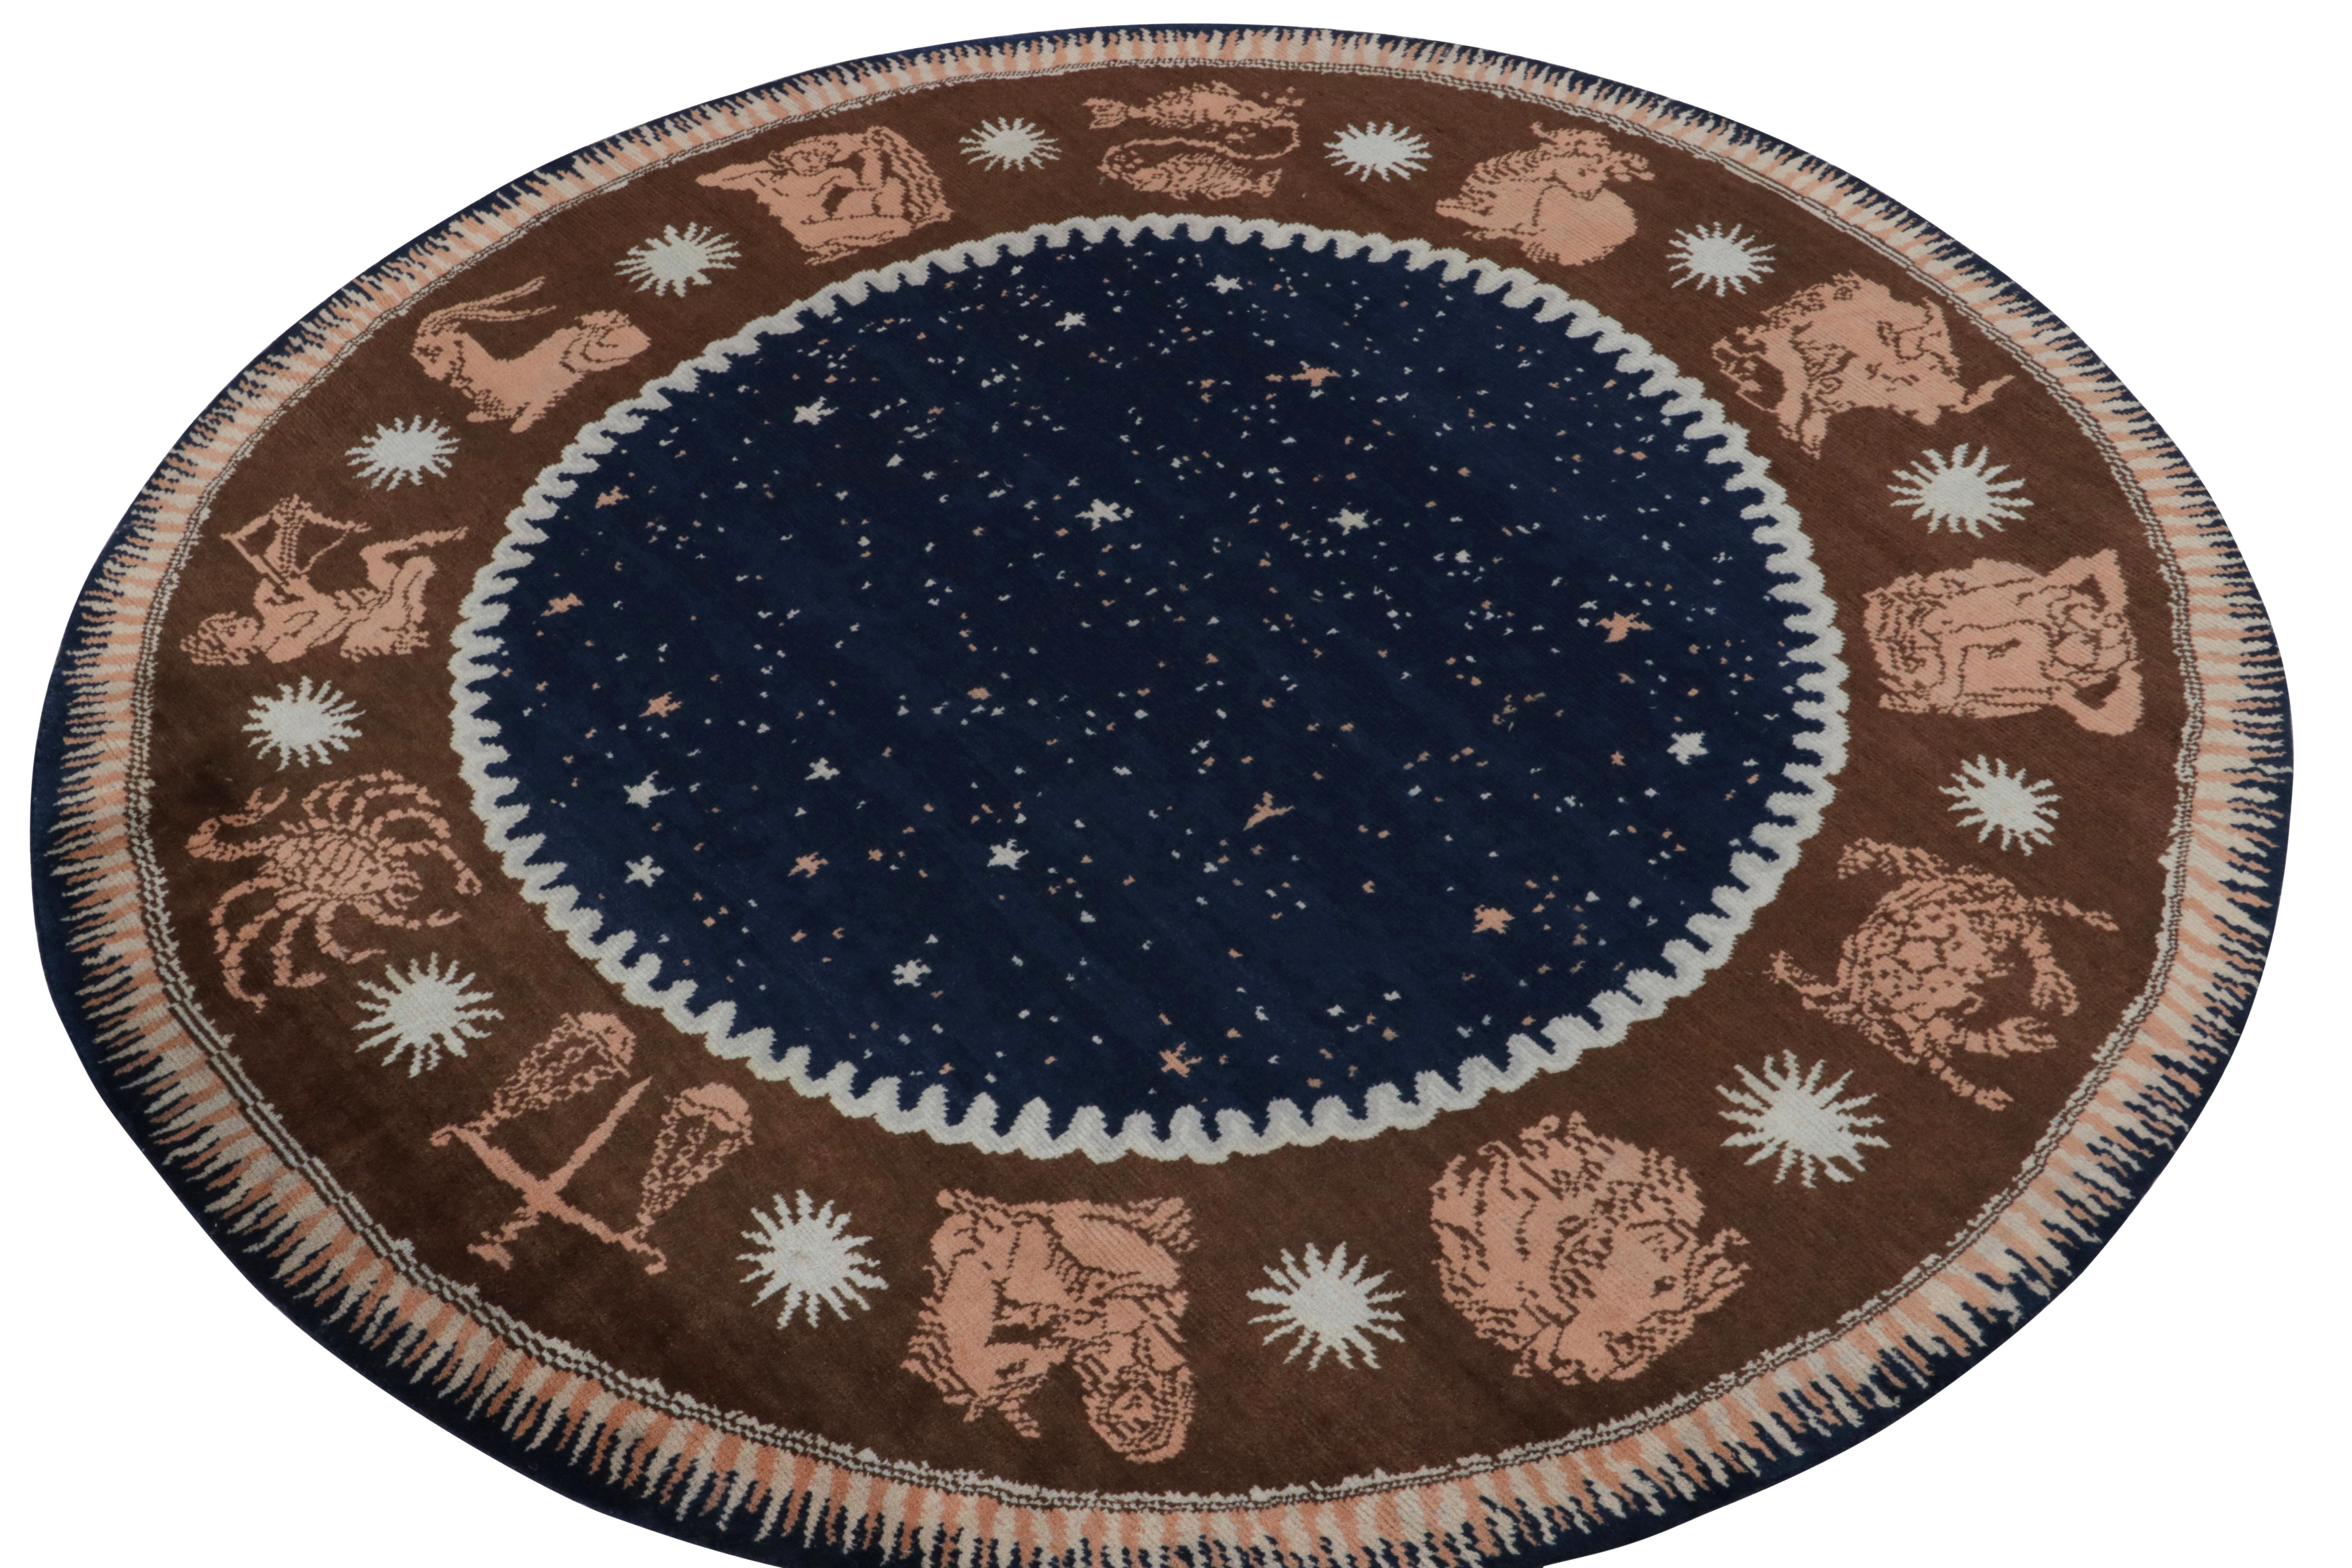 Enjoying luxurious hand-knotted wool, a remarkable 9’ circular piece from the inspired new Deco Collection by Rug & Kilim. 

On the Design: Drawing on French art deco rugs of the 1920s, the piece features a pictorial border of a zodiac wheel